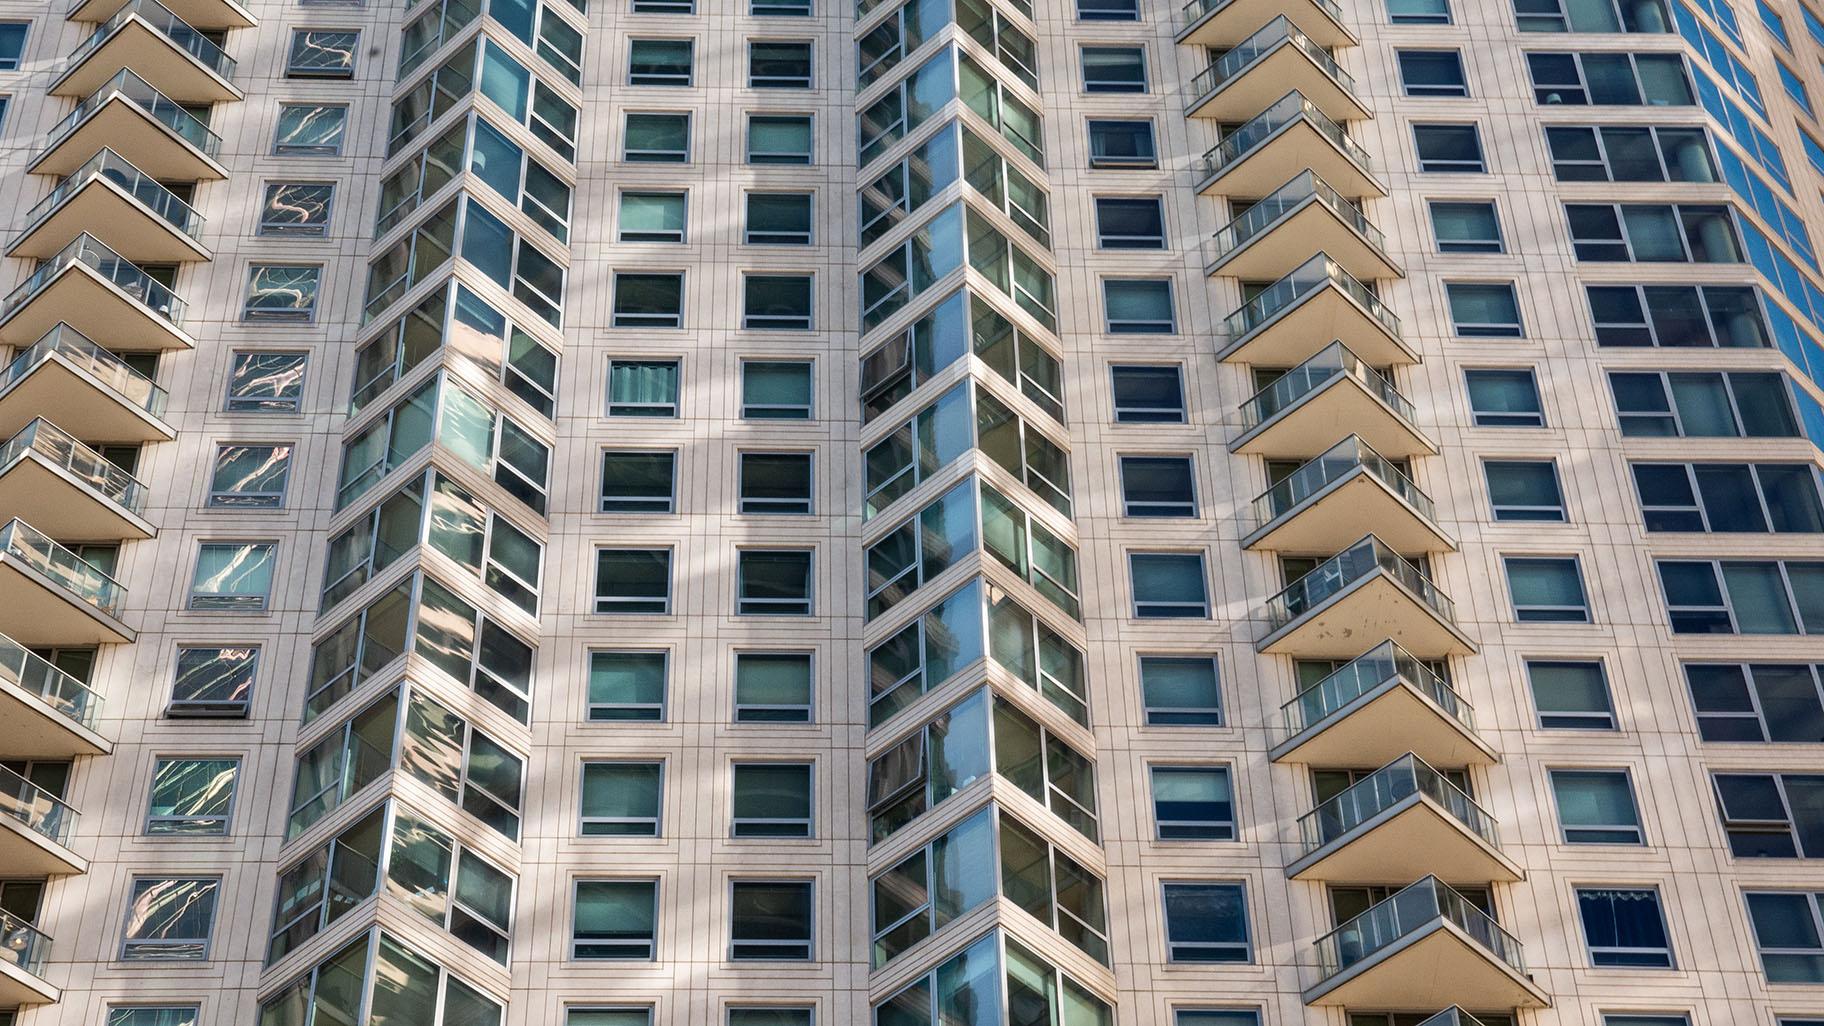 A Chicago condo building. (Photo by Dylan LaPierre on Unsplash)